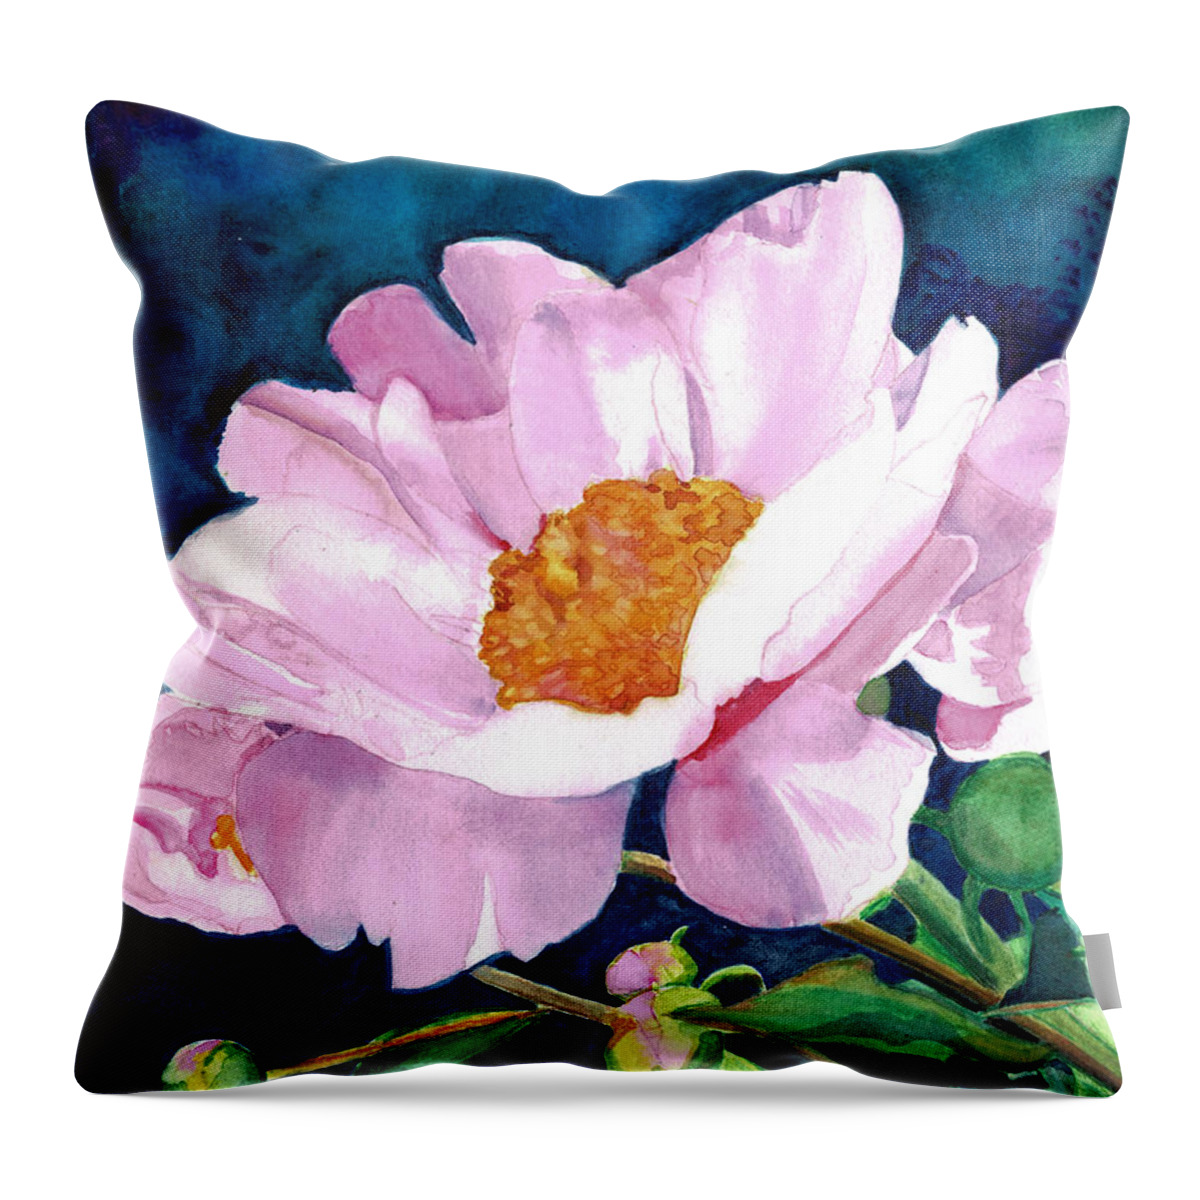 Reach For The Sun Throw Pillow featuring the painting Reach For The Sun by Daniela Easter